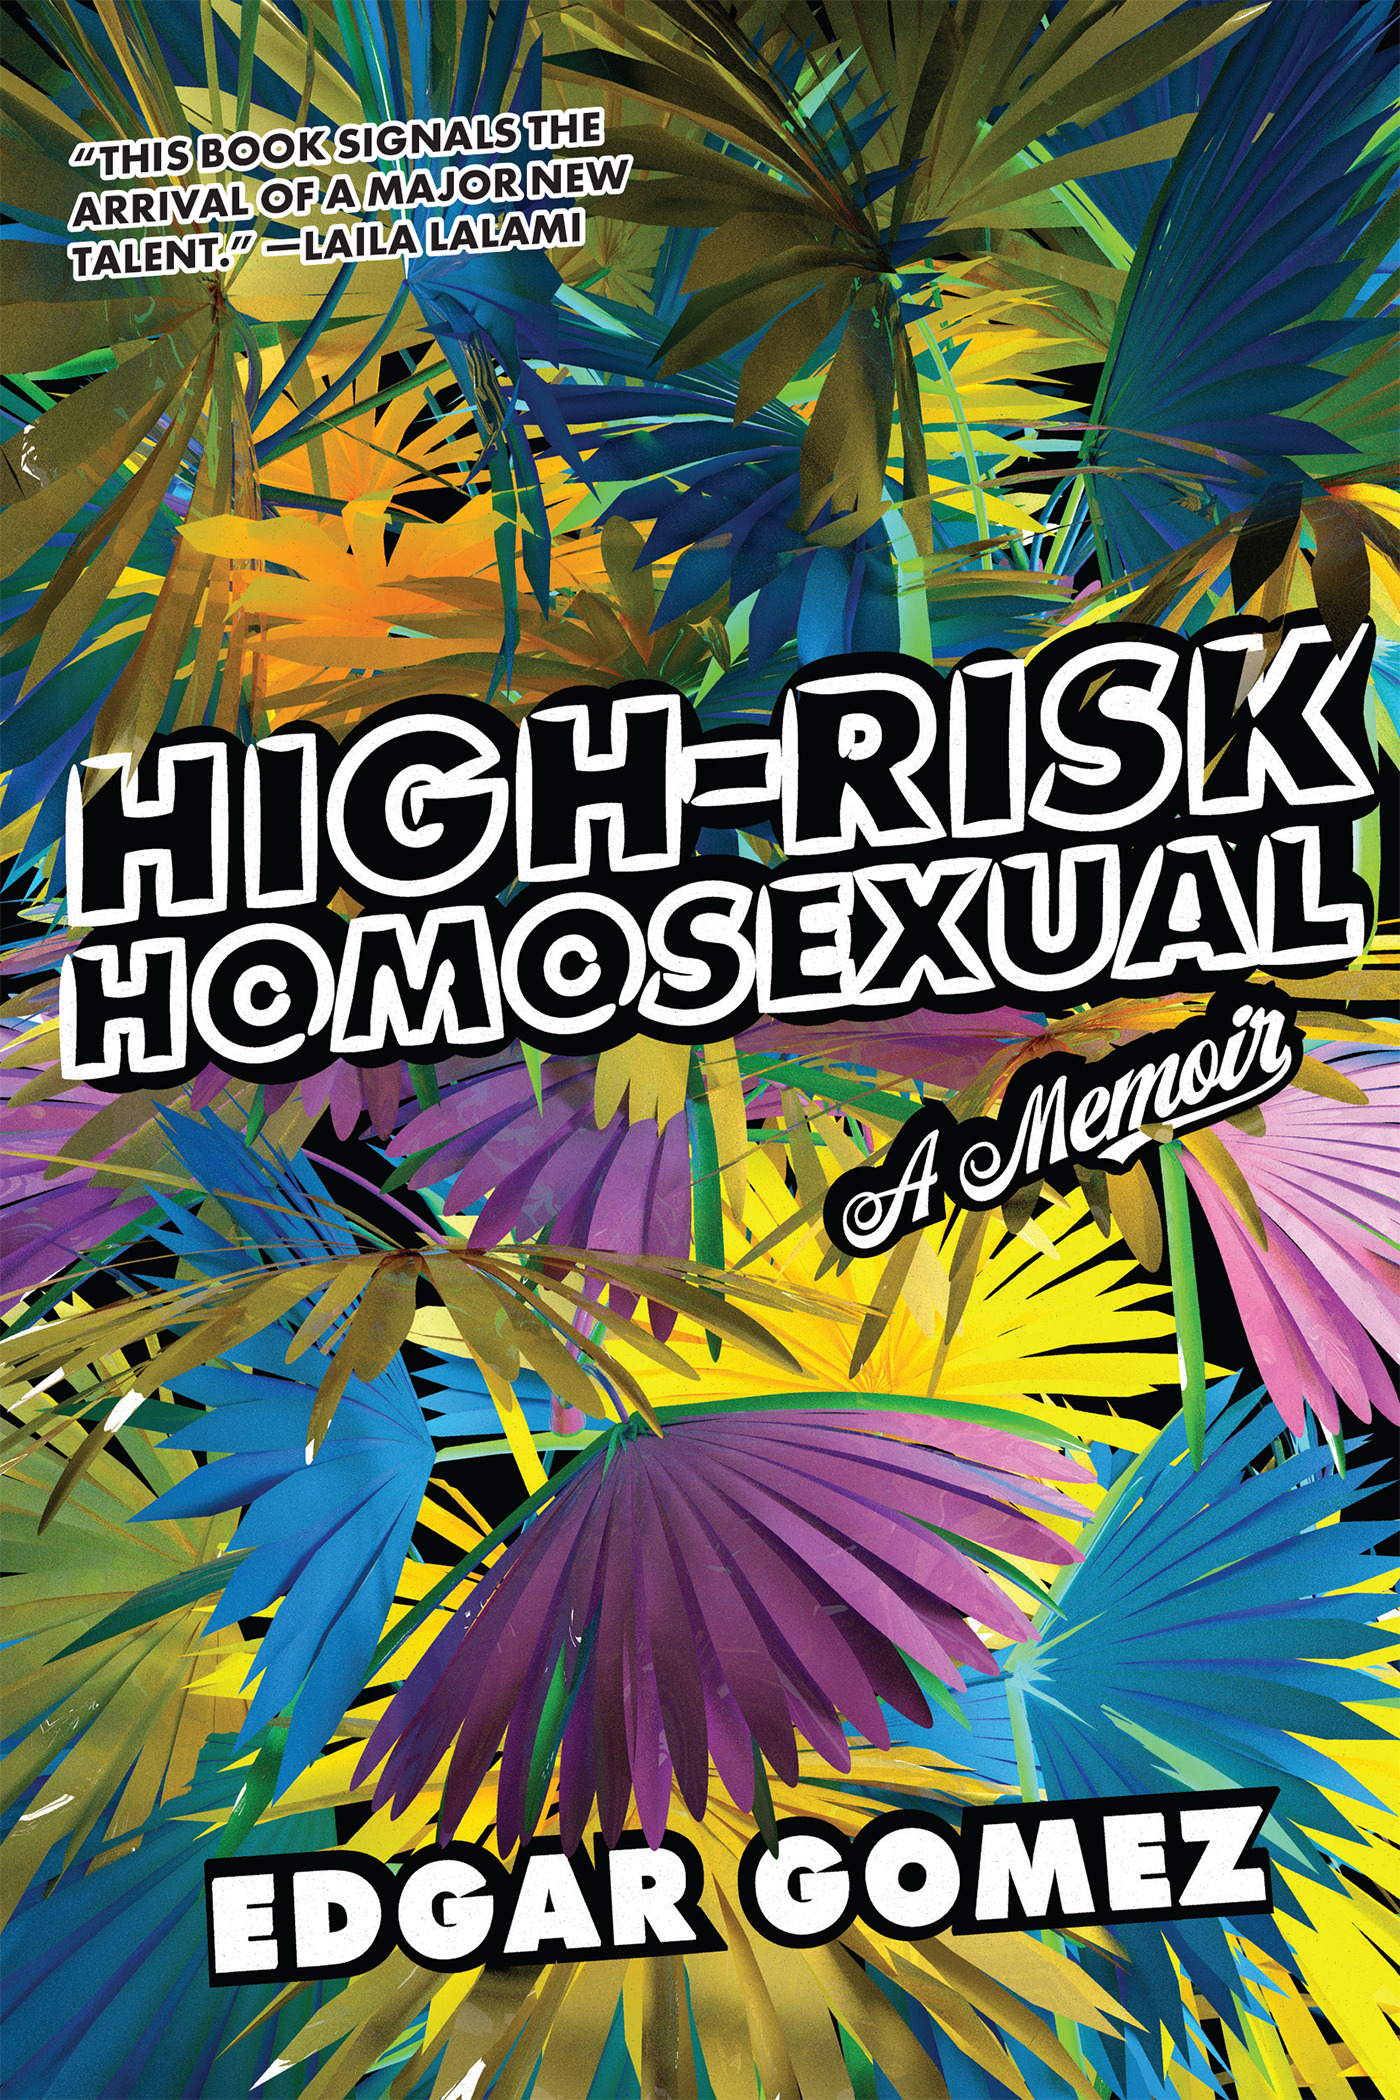 *VIRTUAL* Book Launch: High-Risk Homosexual by Edgar Gomez in conversation with Christopher Gonzalez